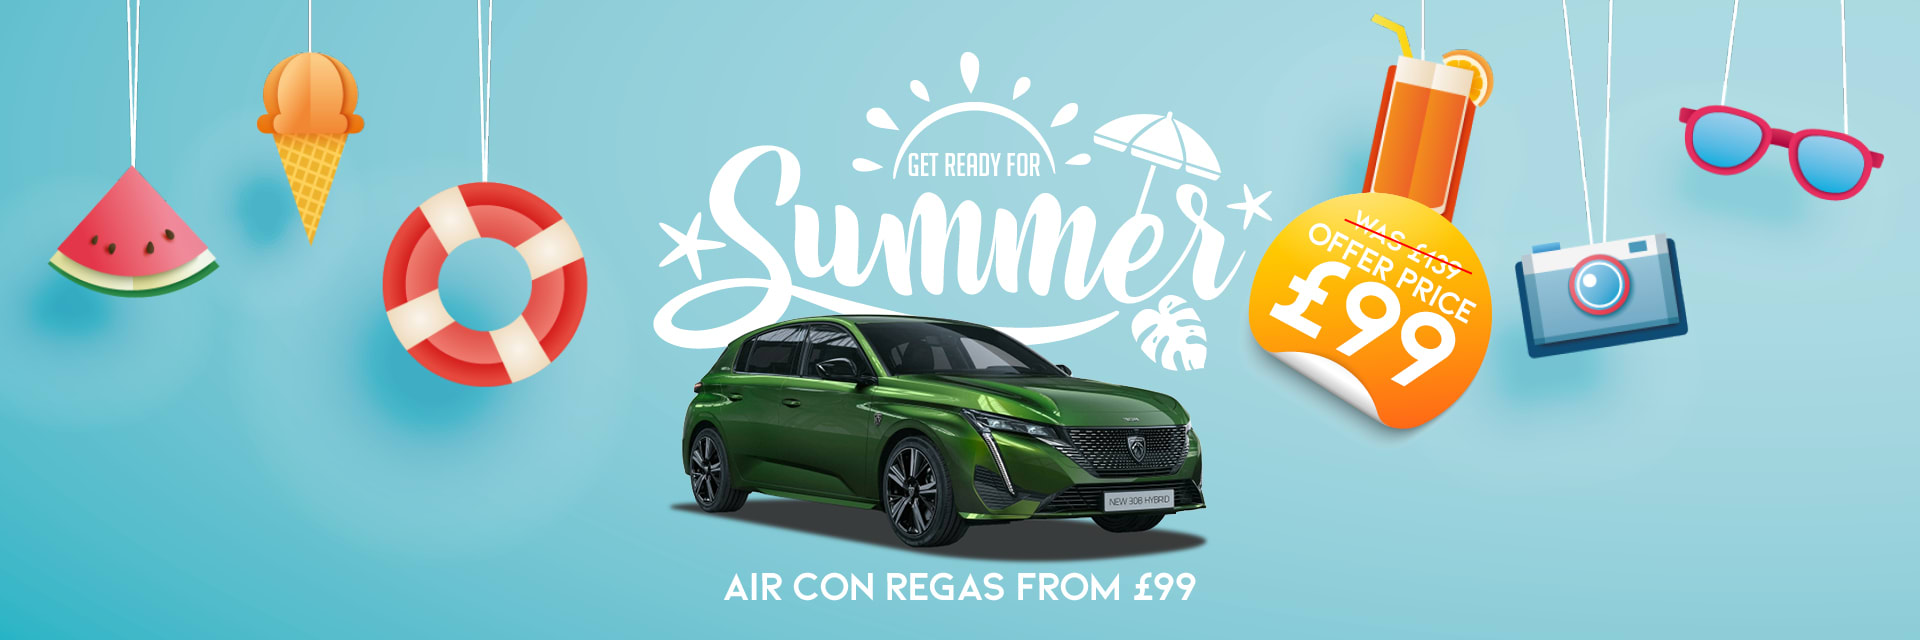 Peugeot Summer Air Con Offer